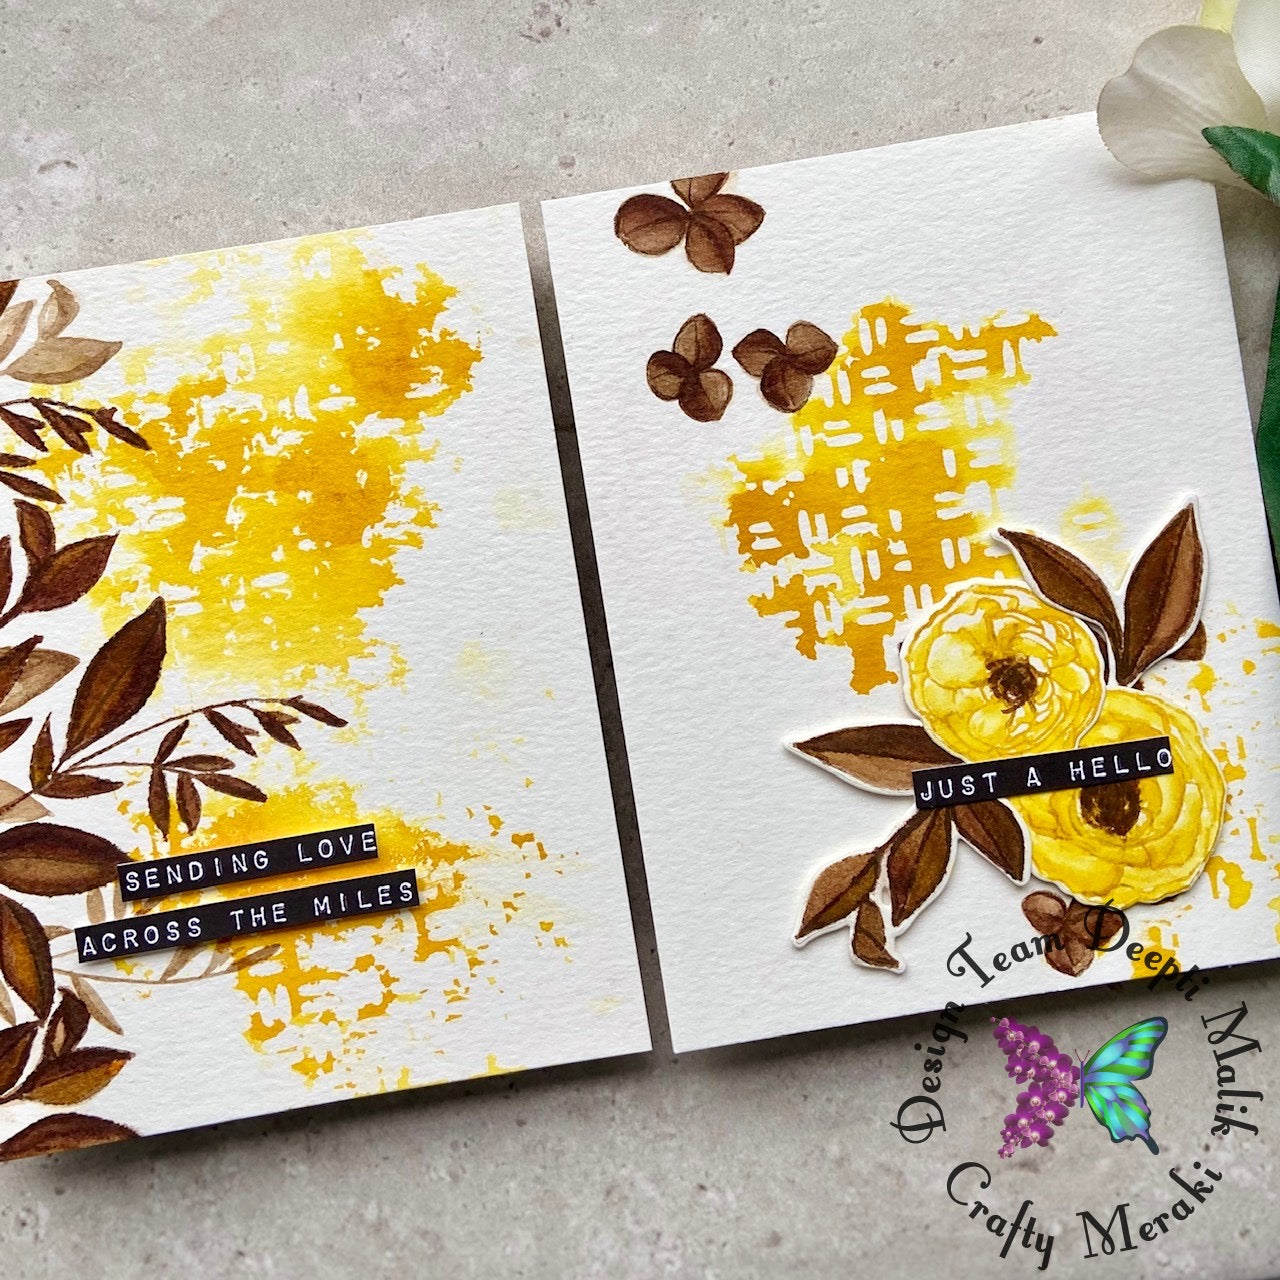 Gorgeous fall themed card with Deepti